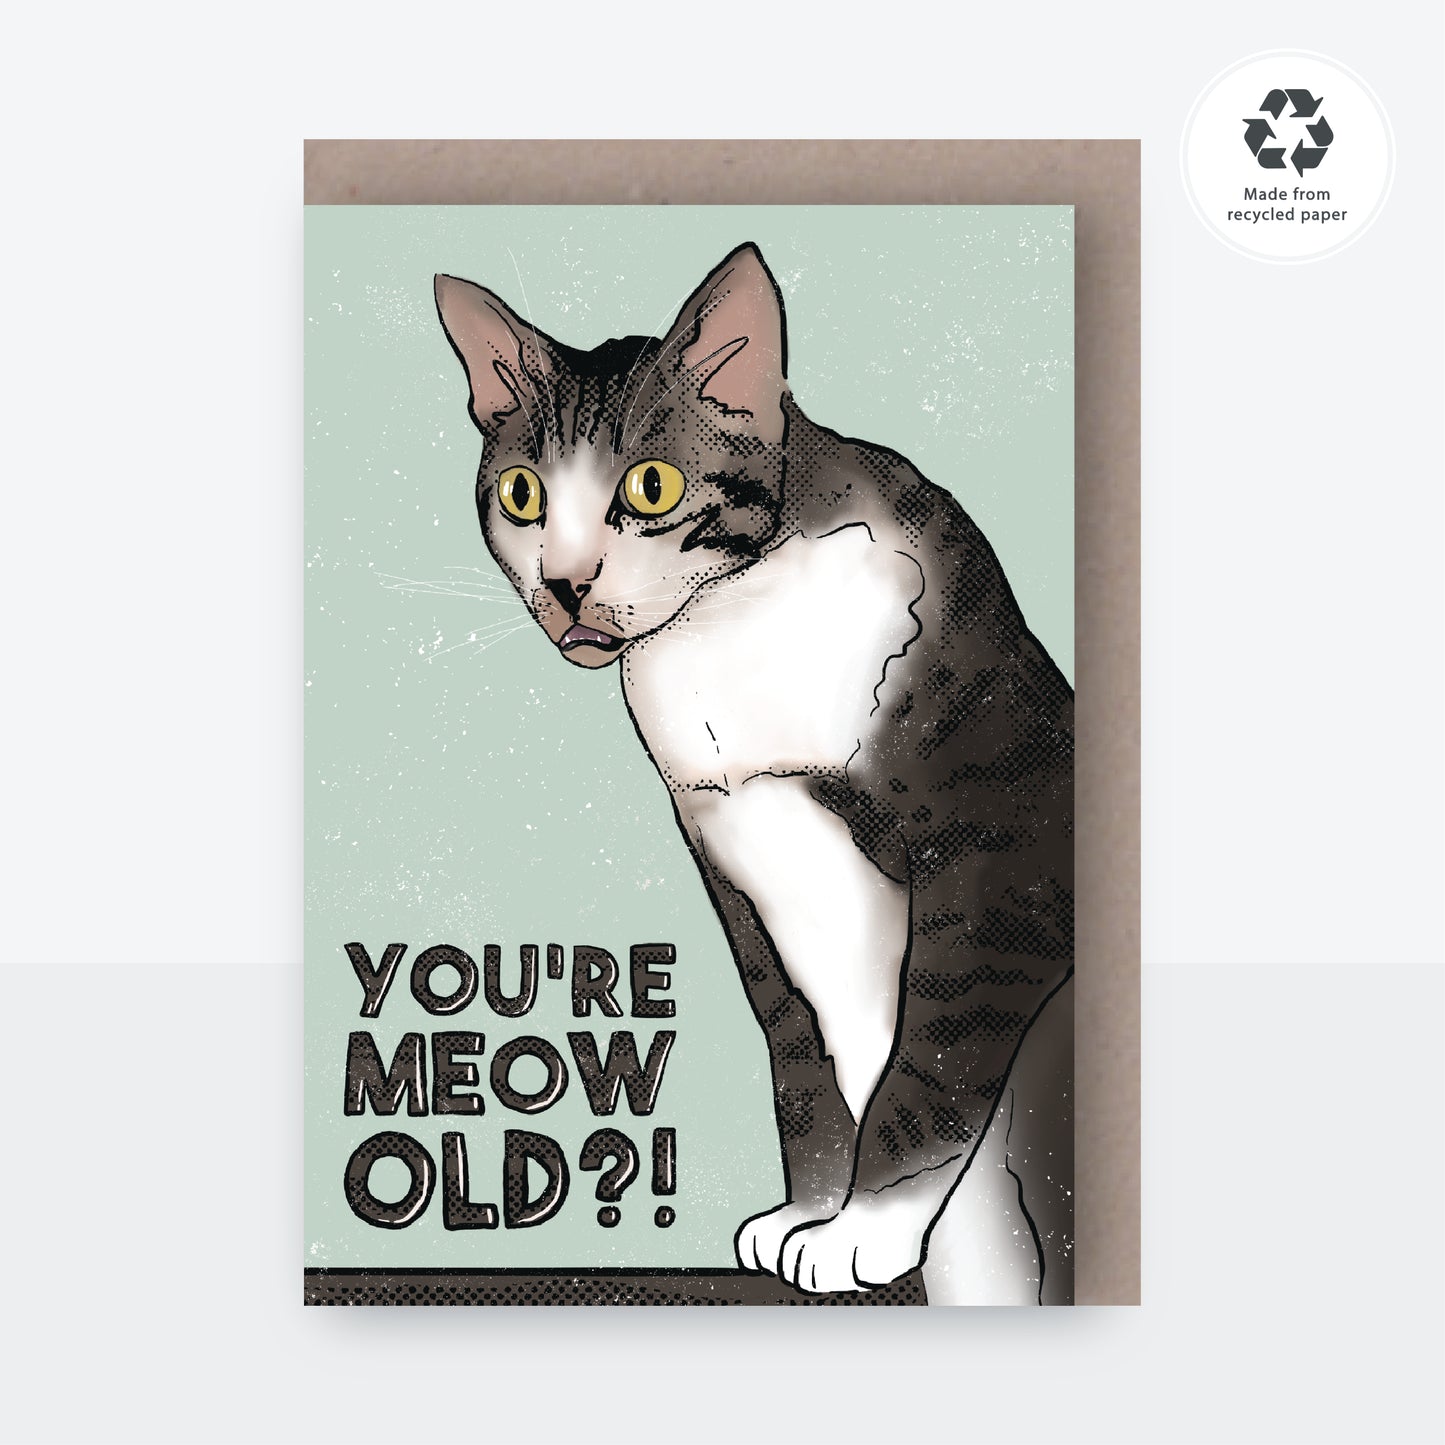 Meow Old?!